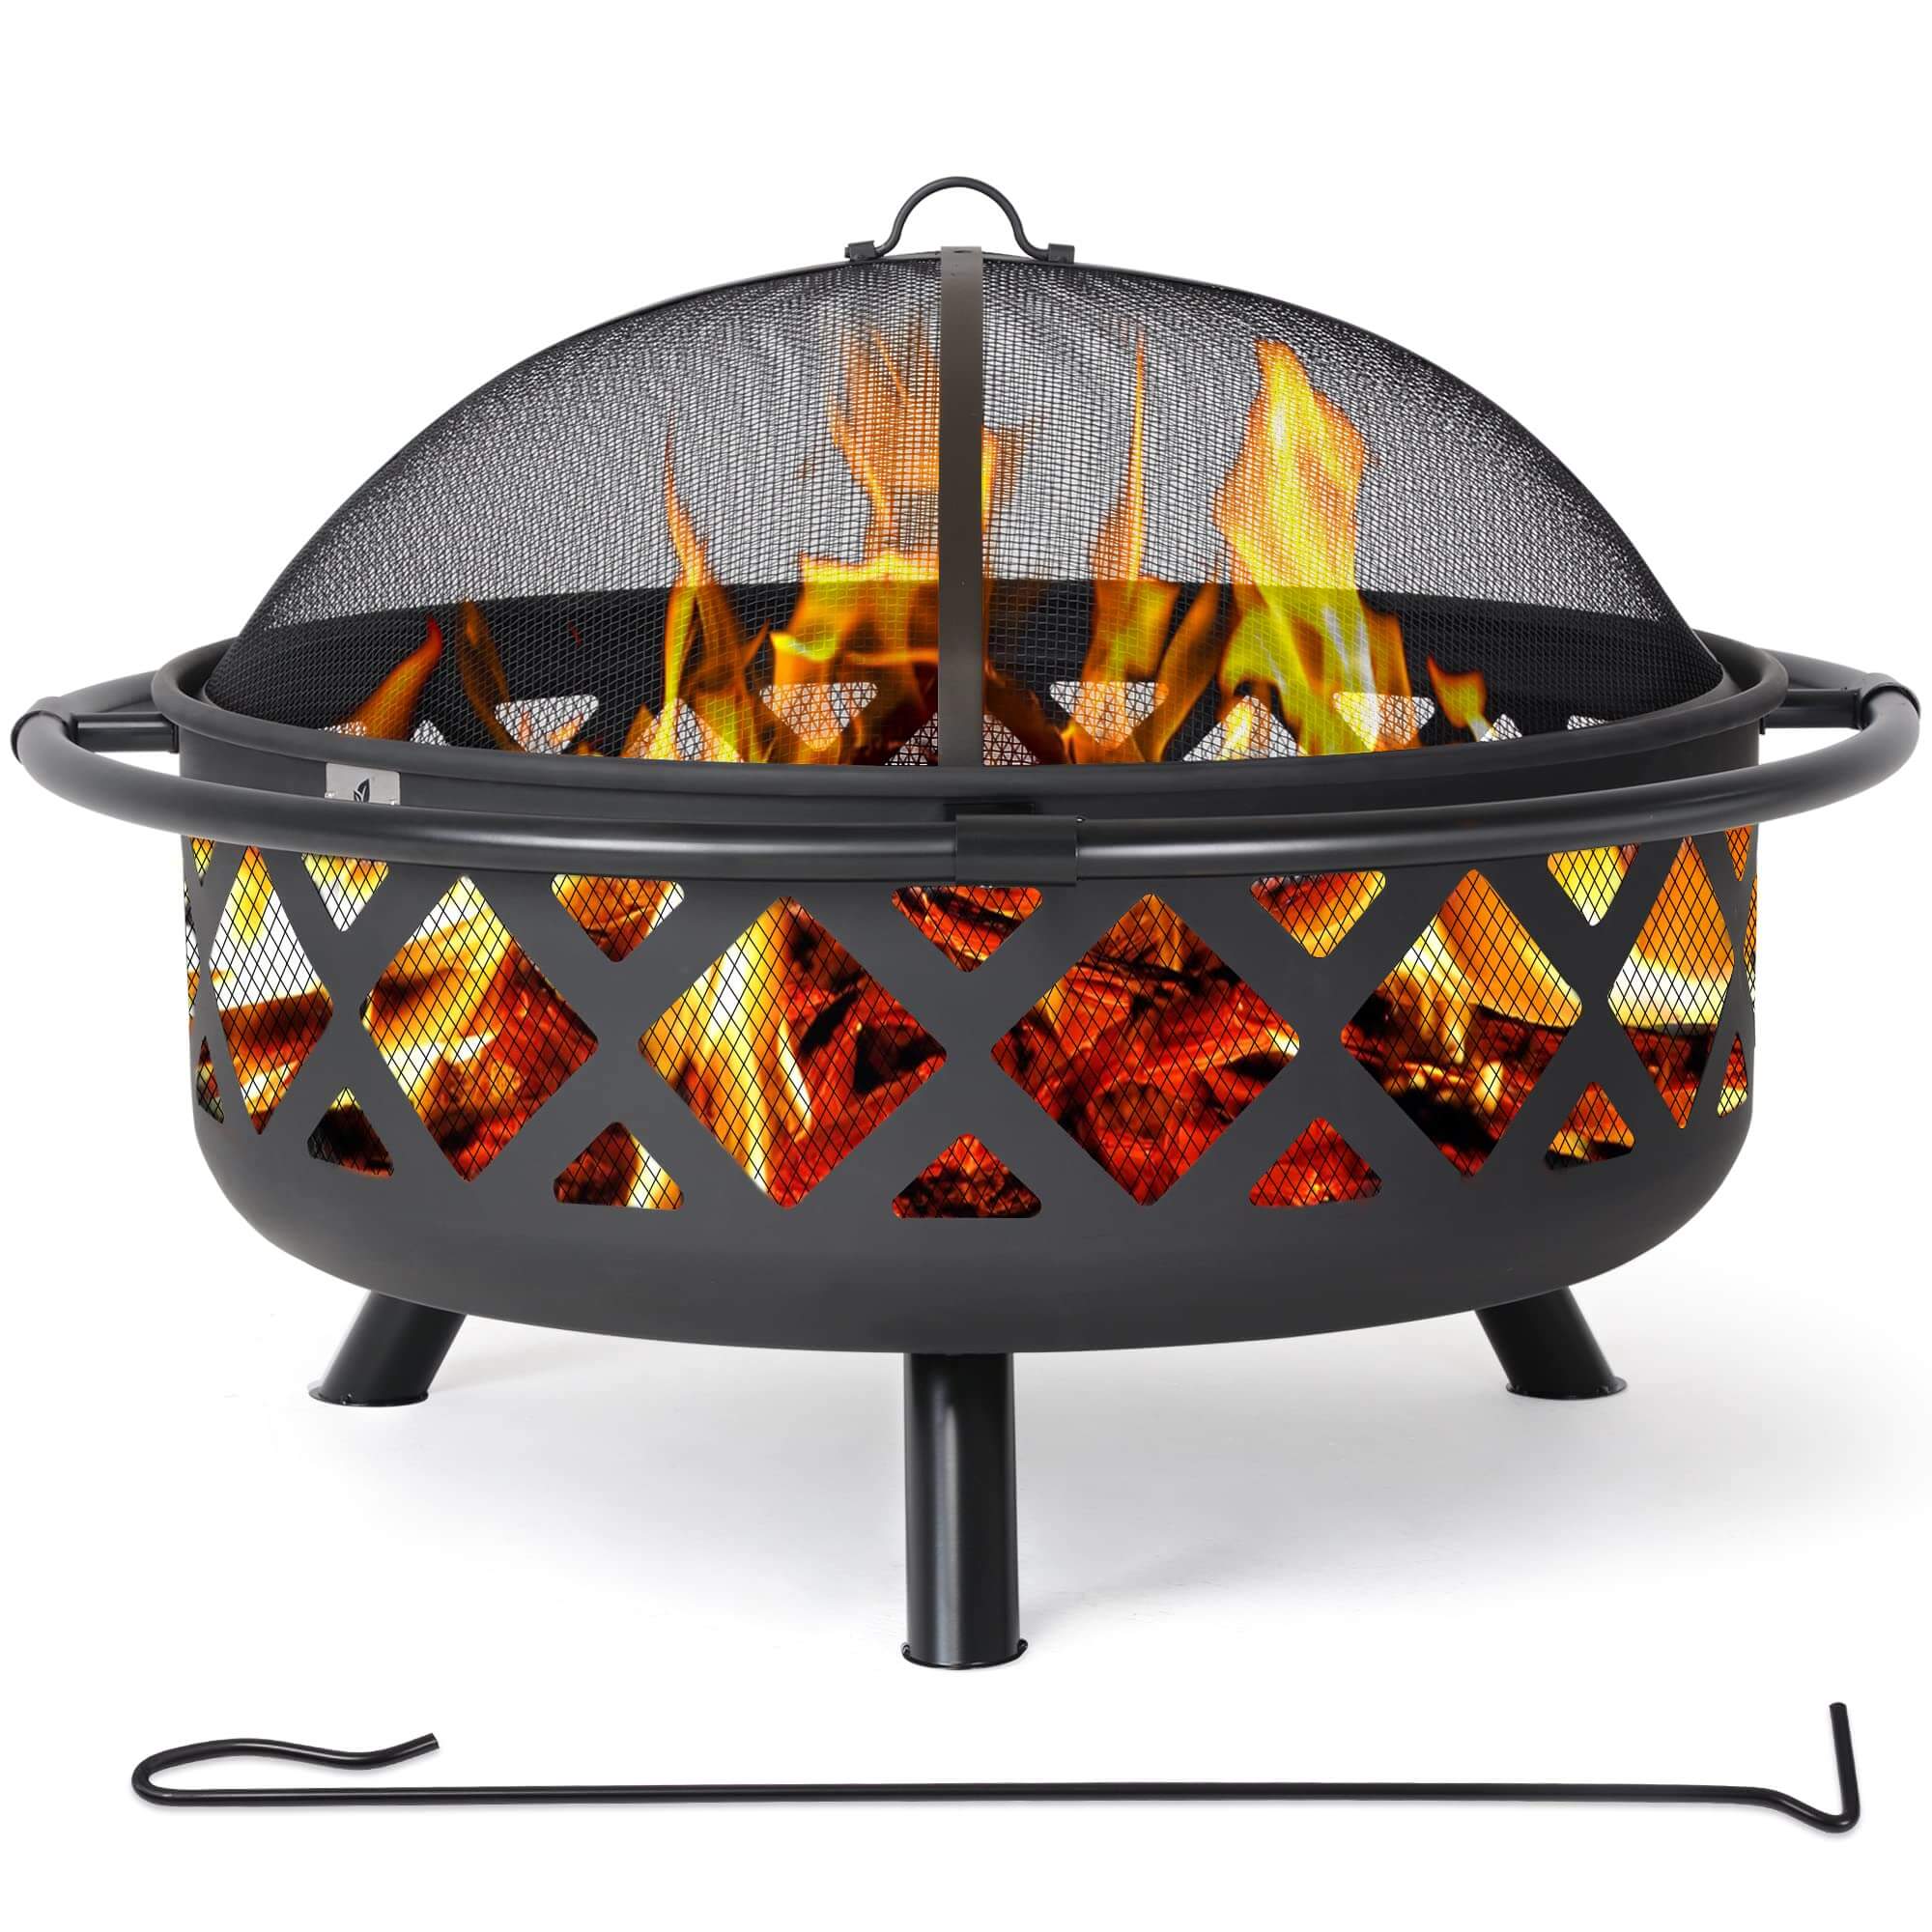 Outdoor-Bonfire-Wood-Burning-Fire-Pit-with-Grill-and-Fireplace-Poker#size_36-inch-2